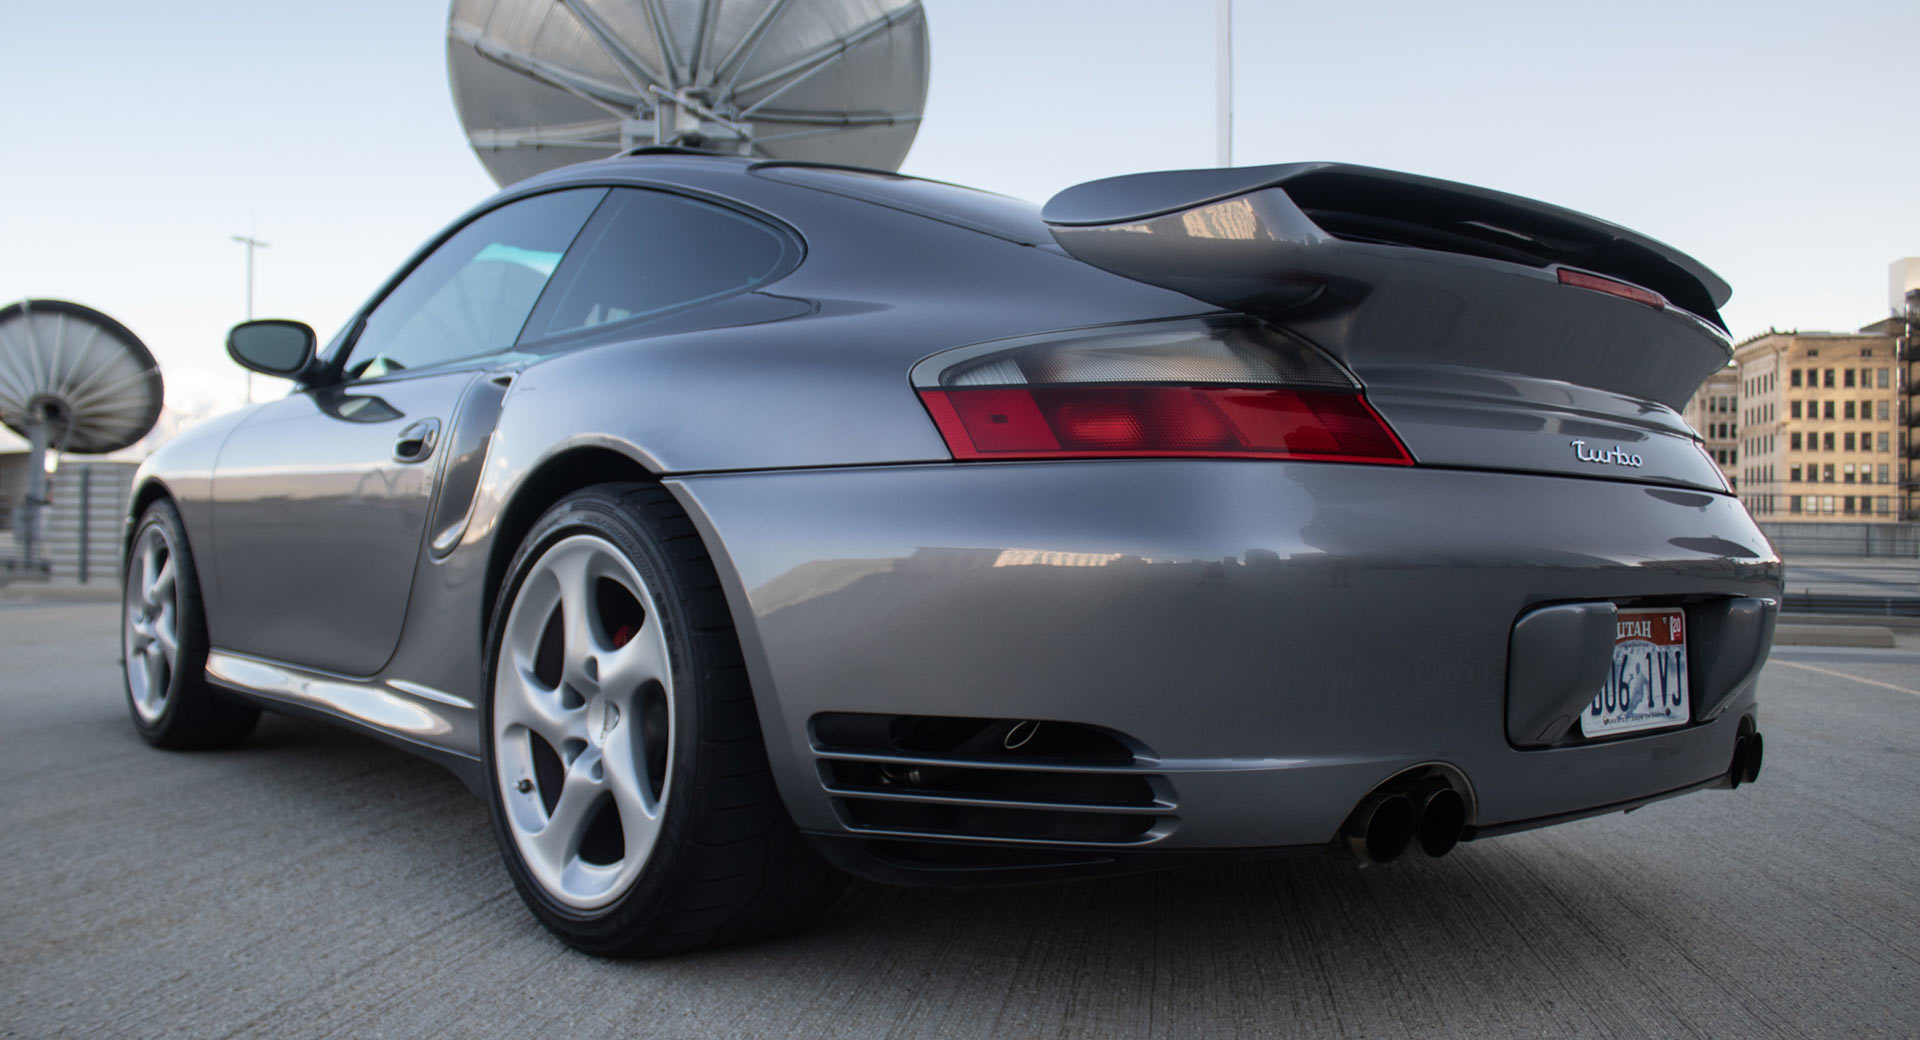 Care For A Manual 2003 Porsche 911 Turbo With 730 HP? | Carscoops